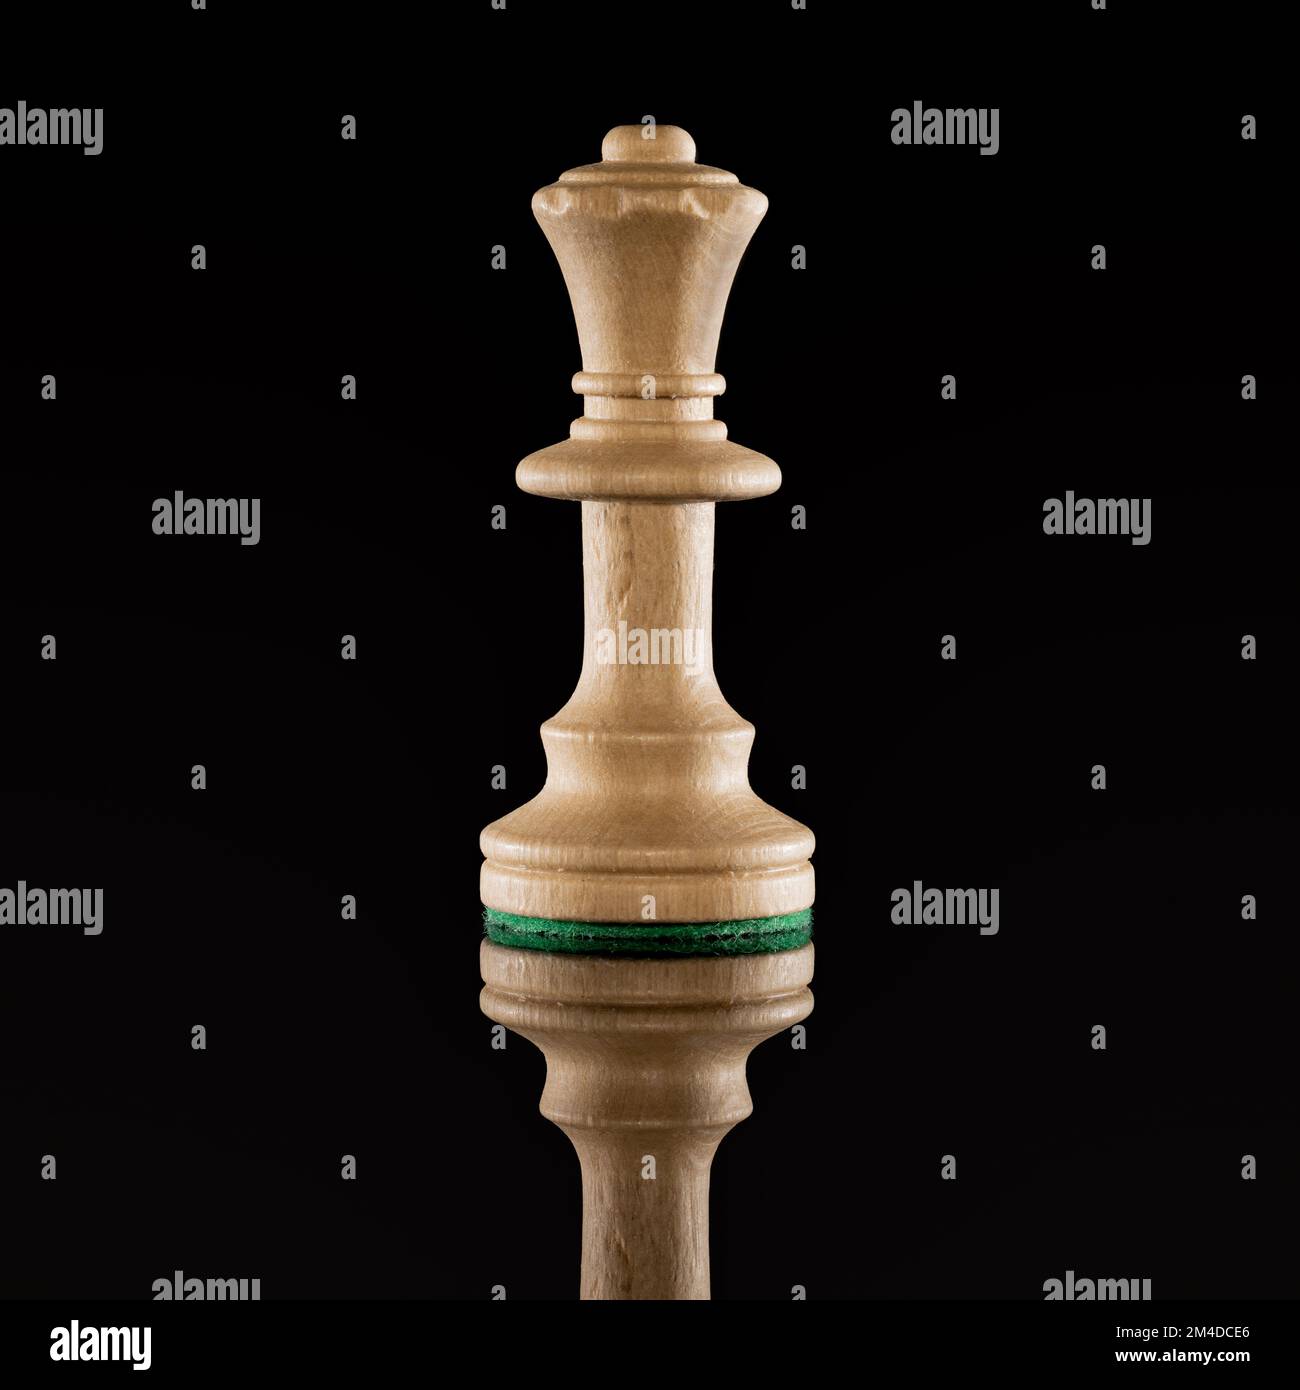 Wooden white chess queen isolated at dark background with transparent reflection on the floor Stock Photo